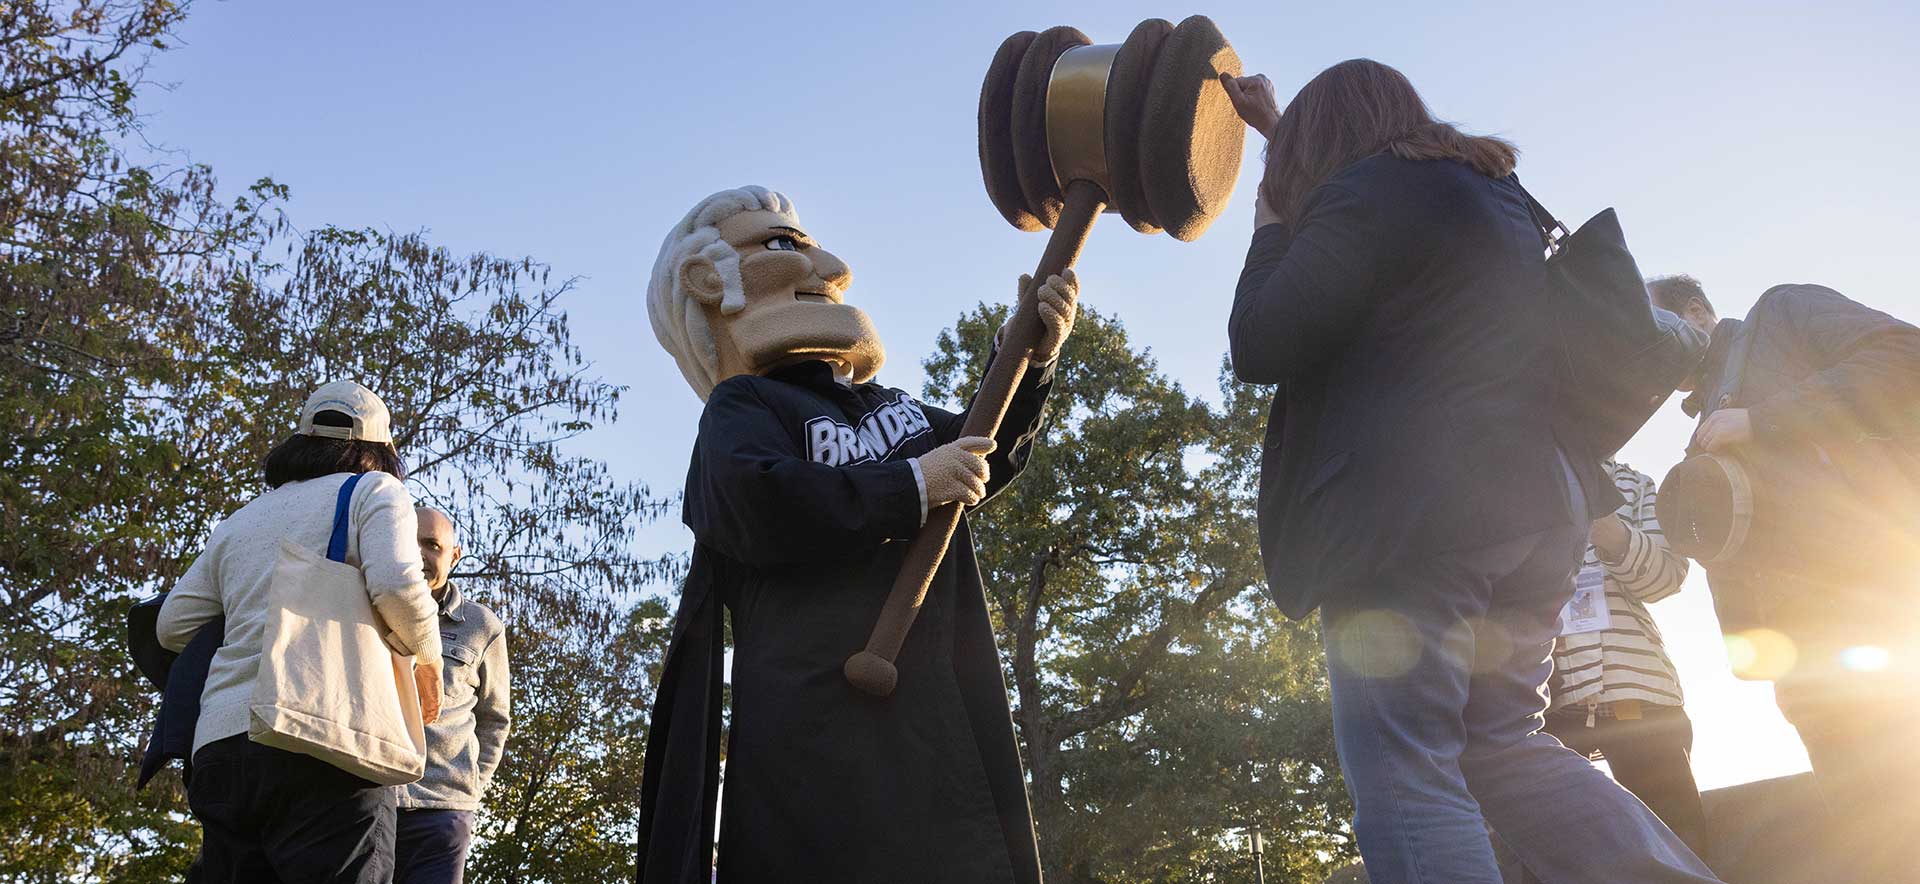 A person high fives the Brandeis Judge mascot's gavel